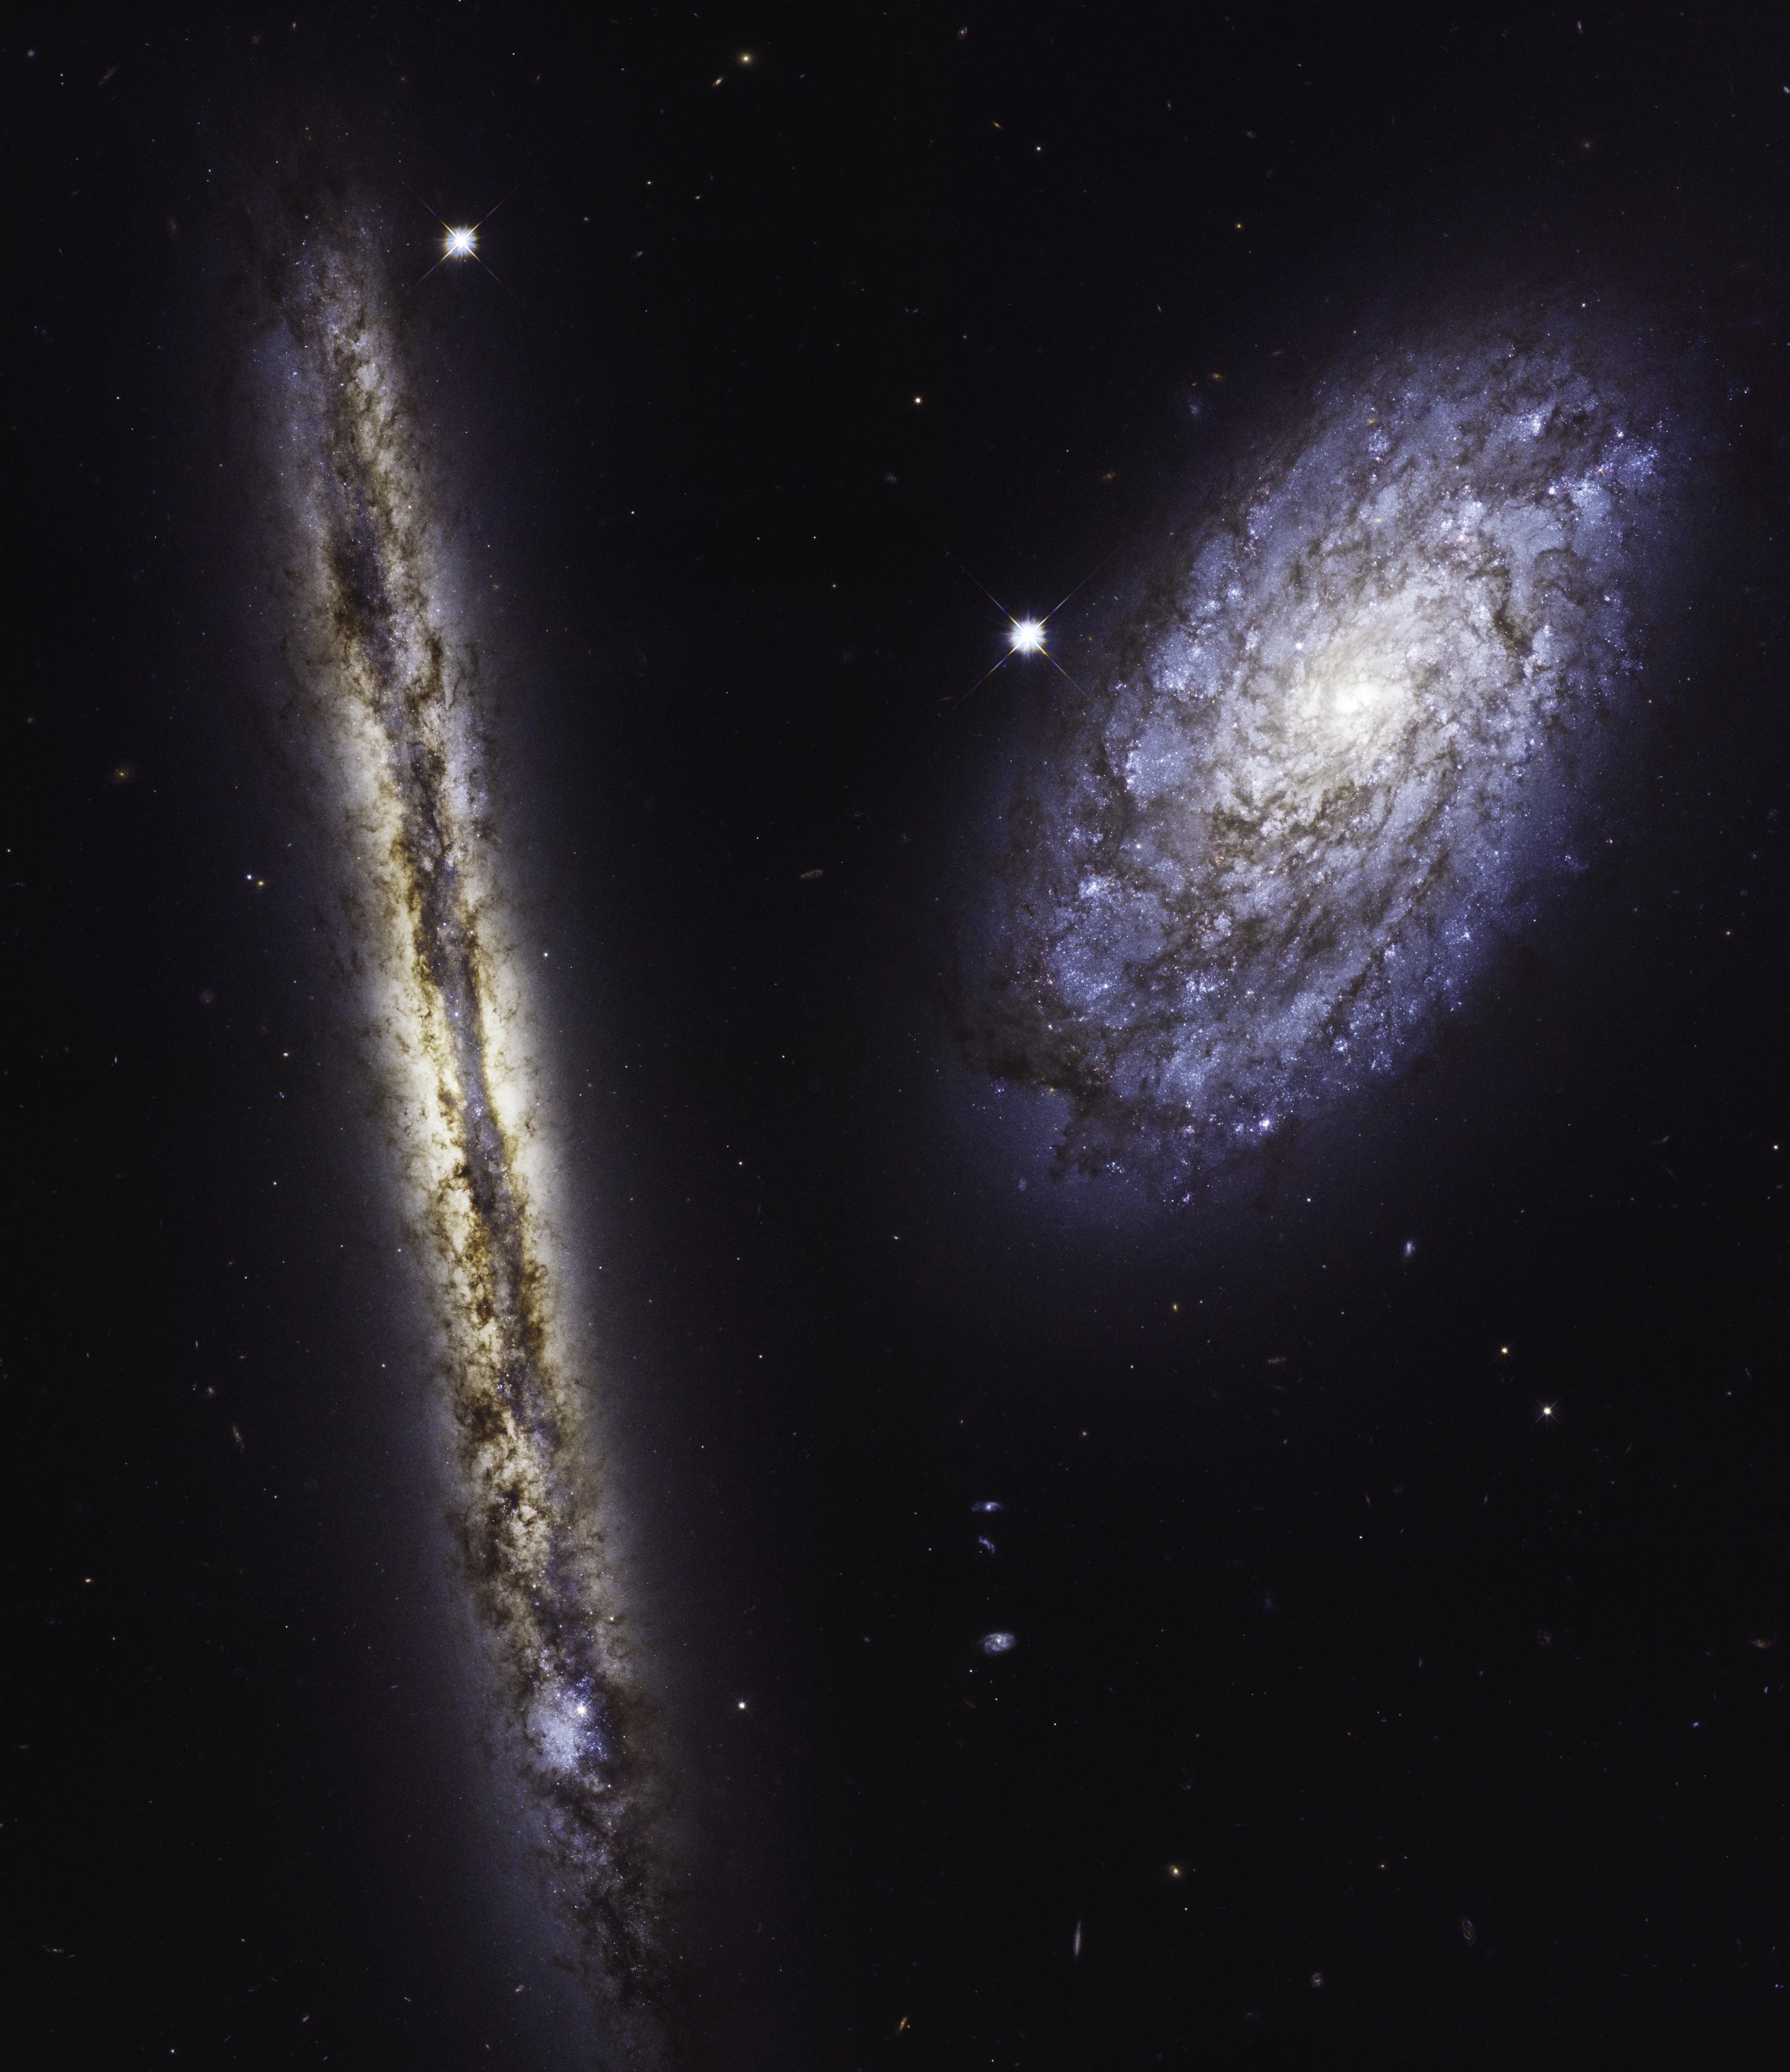 Two spiral galaxies are viewed against black space. One is facing us, while the other is viewed edge-on.